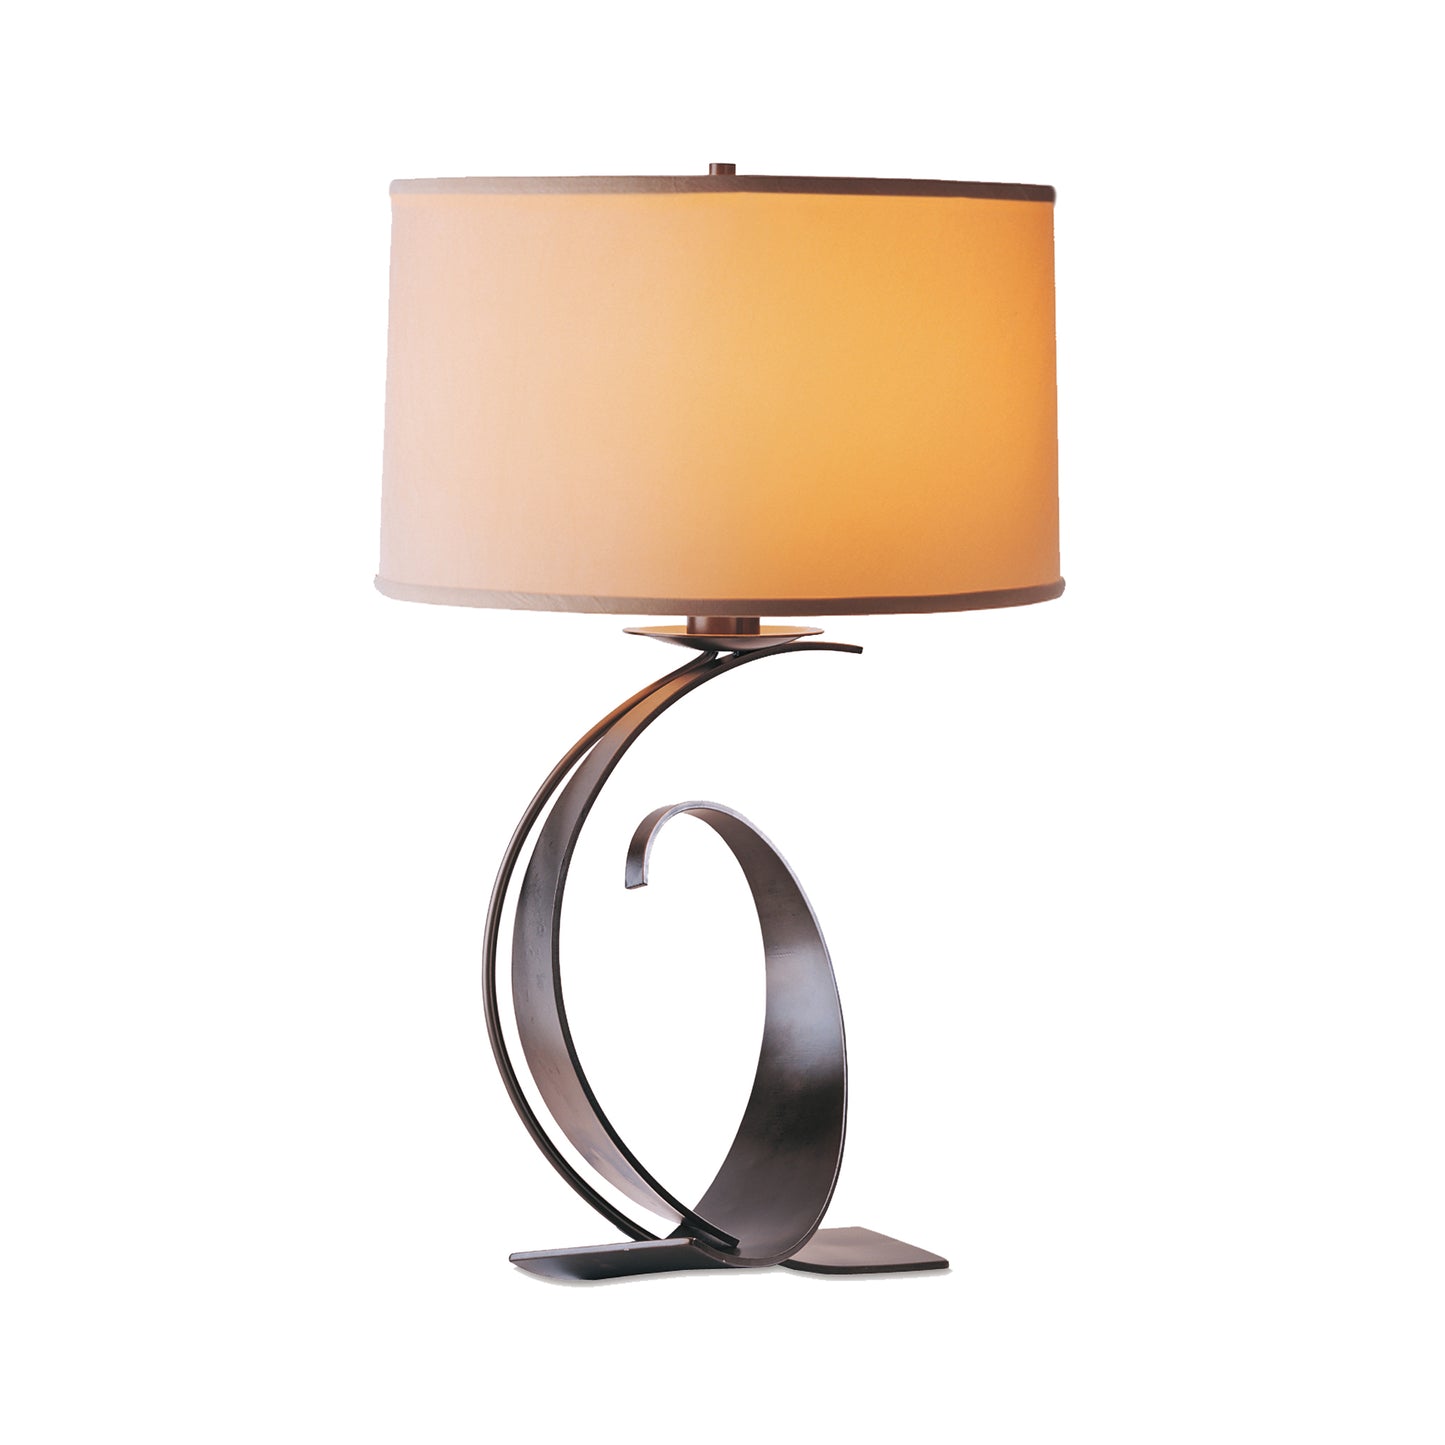 A modern Hubbardton Forge Fullered Impressions Large Table Lamp with a sleek, curved metal base crafted using traditional metal forging techniques and a large, cylindrical, beige-colored shade, isolated on a white background.